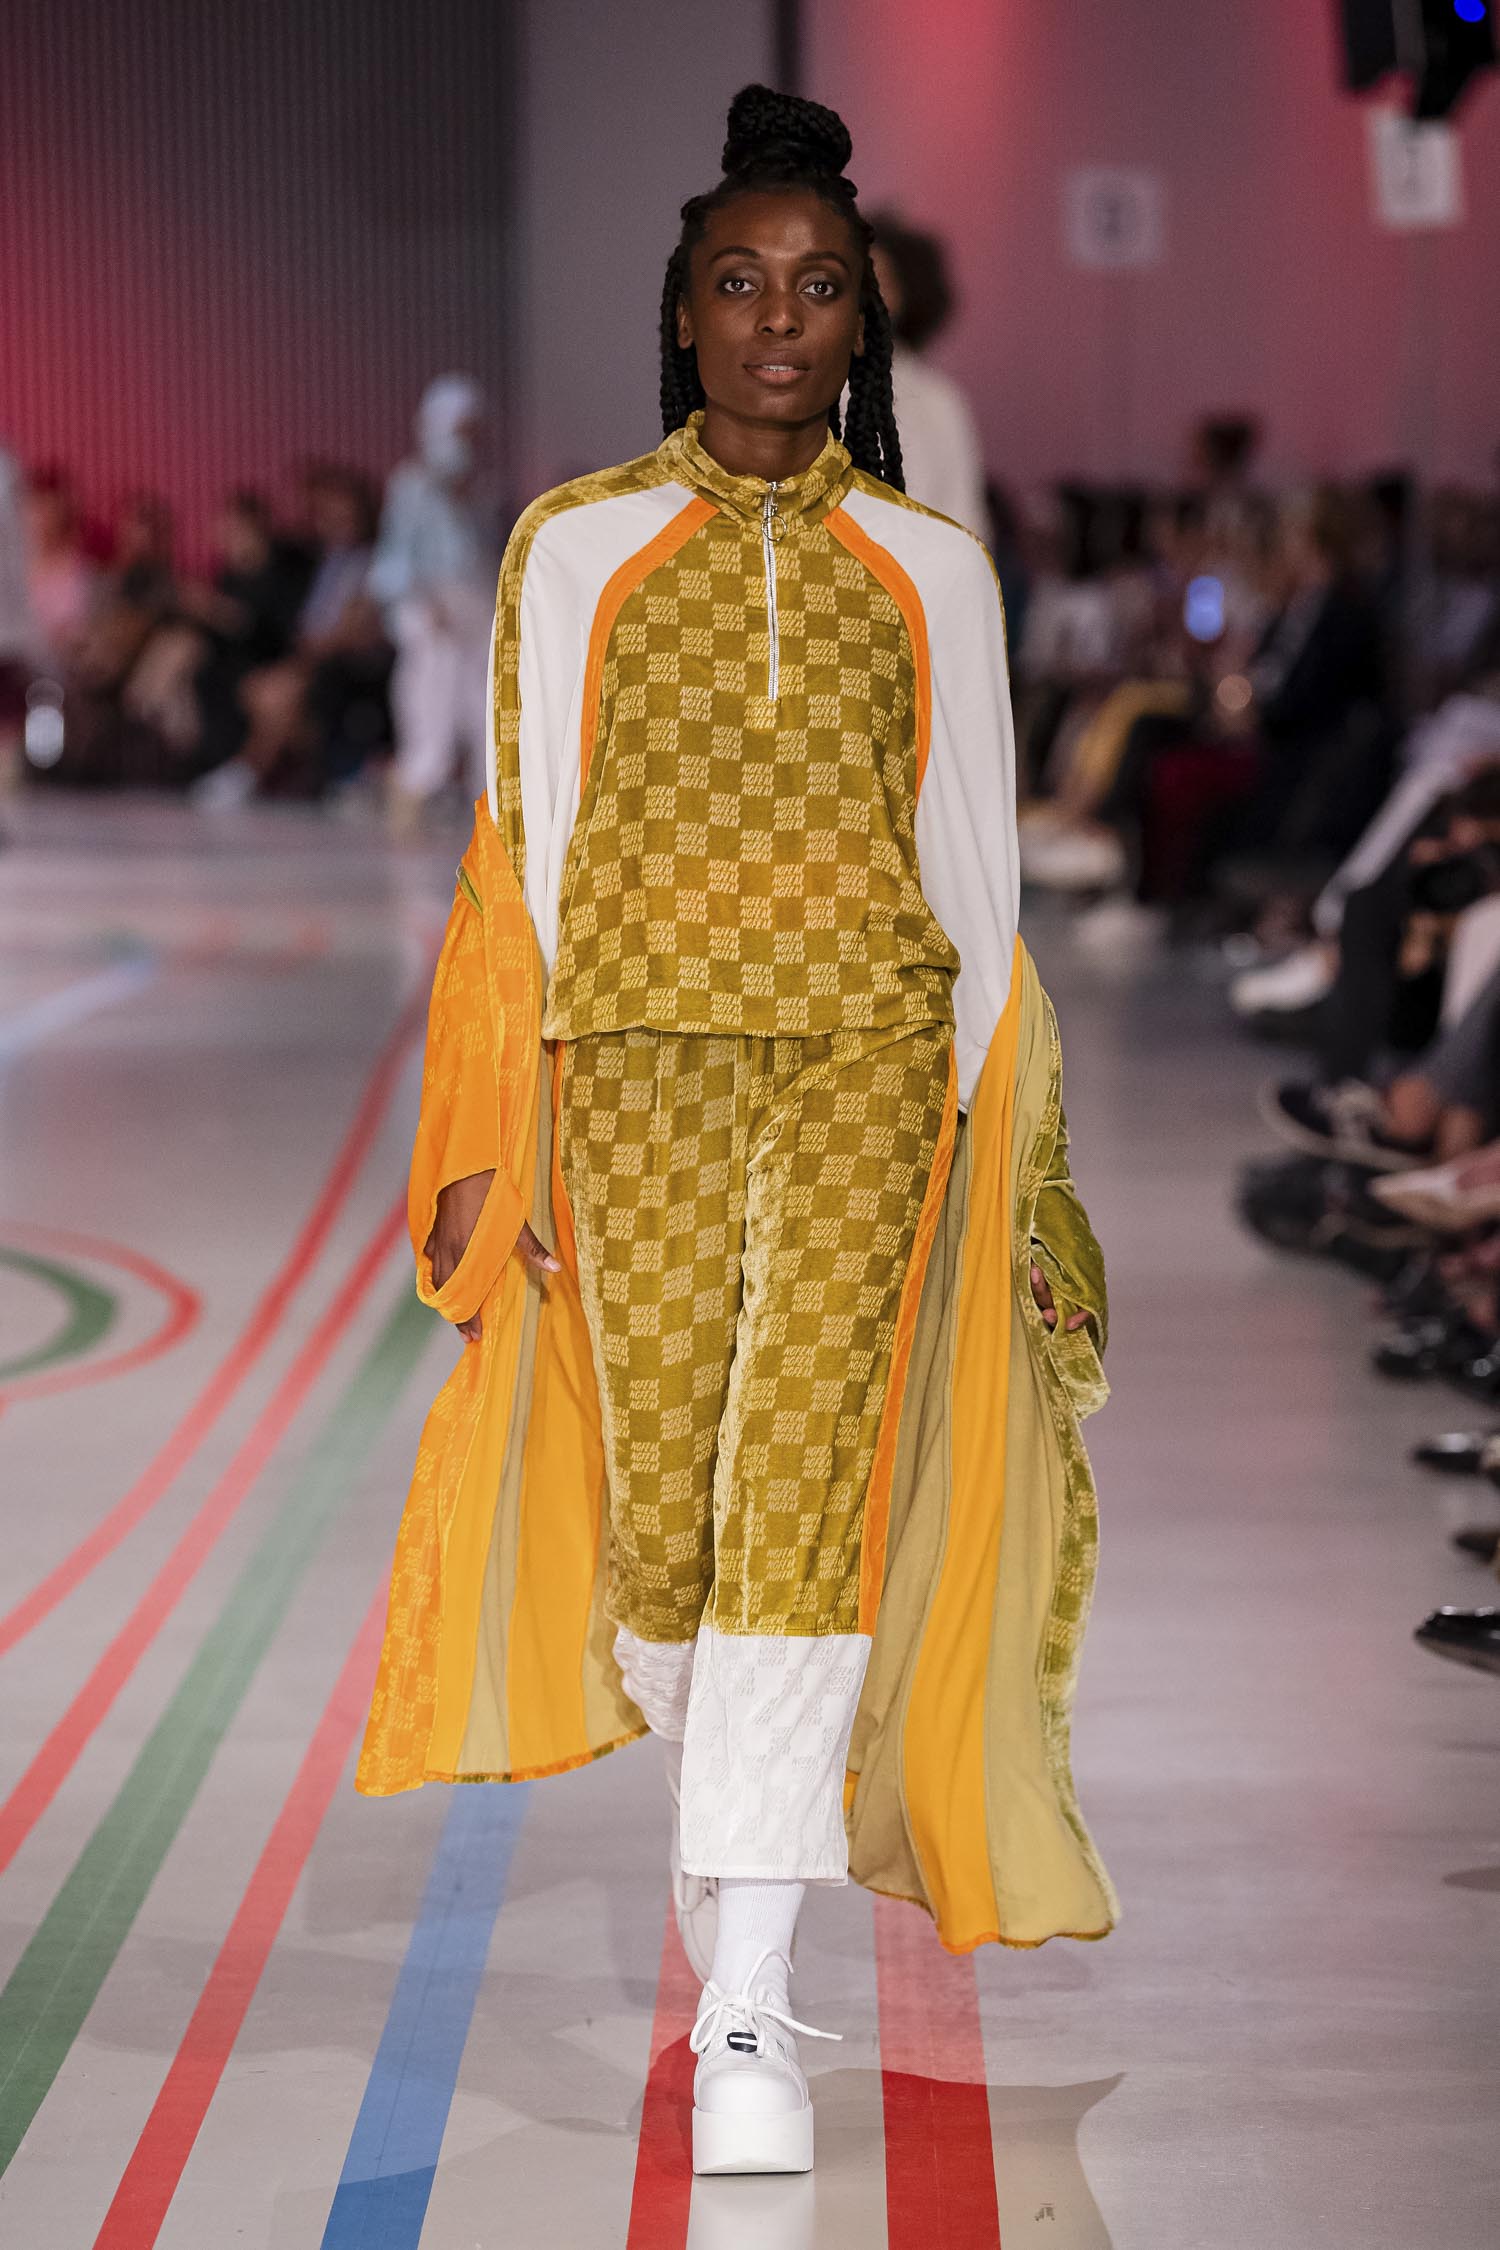 SHOW MODEKLASSE 19 : PHOTOS BY SALVATORE DRAGONE – A Shaded View on Fashion